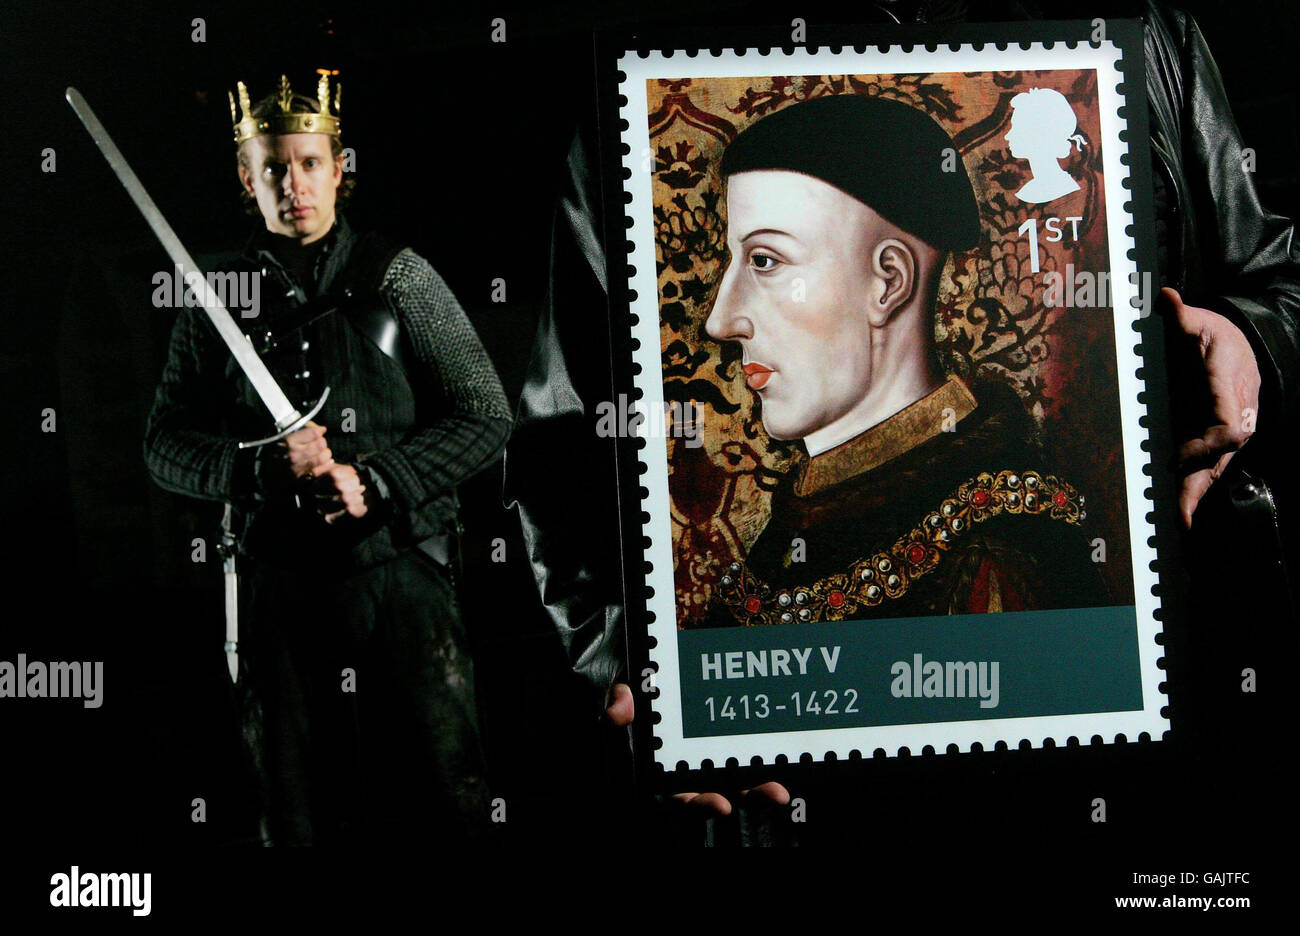 Actor Geoffrey Streatfeild who plays Henry V in the Royal Shakespeare Company's latest production of 'The Histories' with one of the 1st Class Stamps from the Royal Mail's new stamp series, the 'Houses of Lancaster and York'. Stock Photo